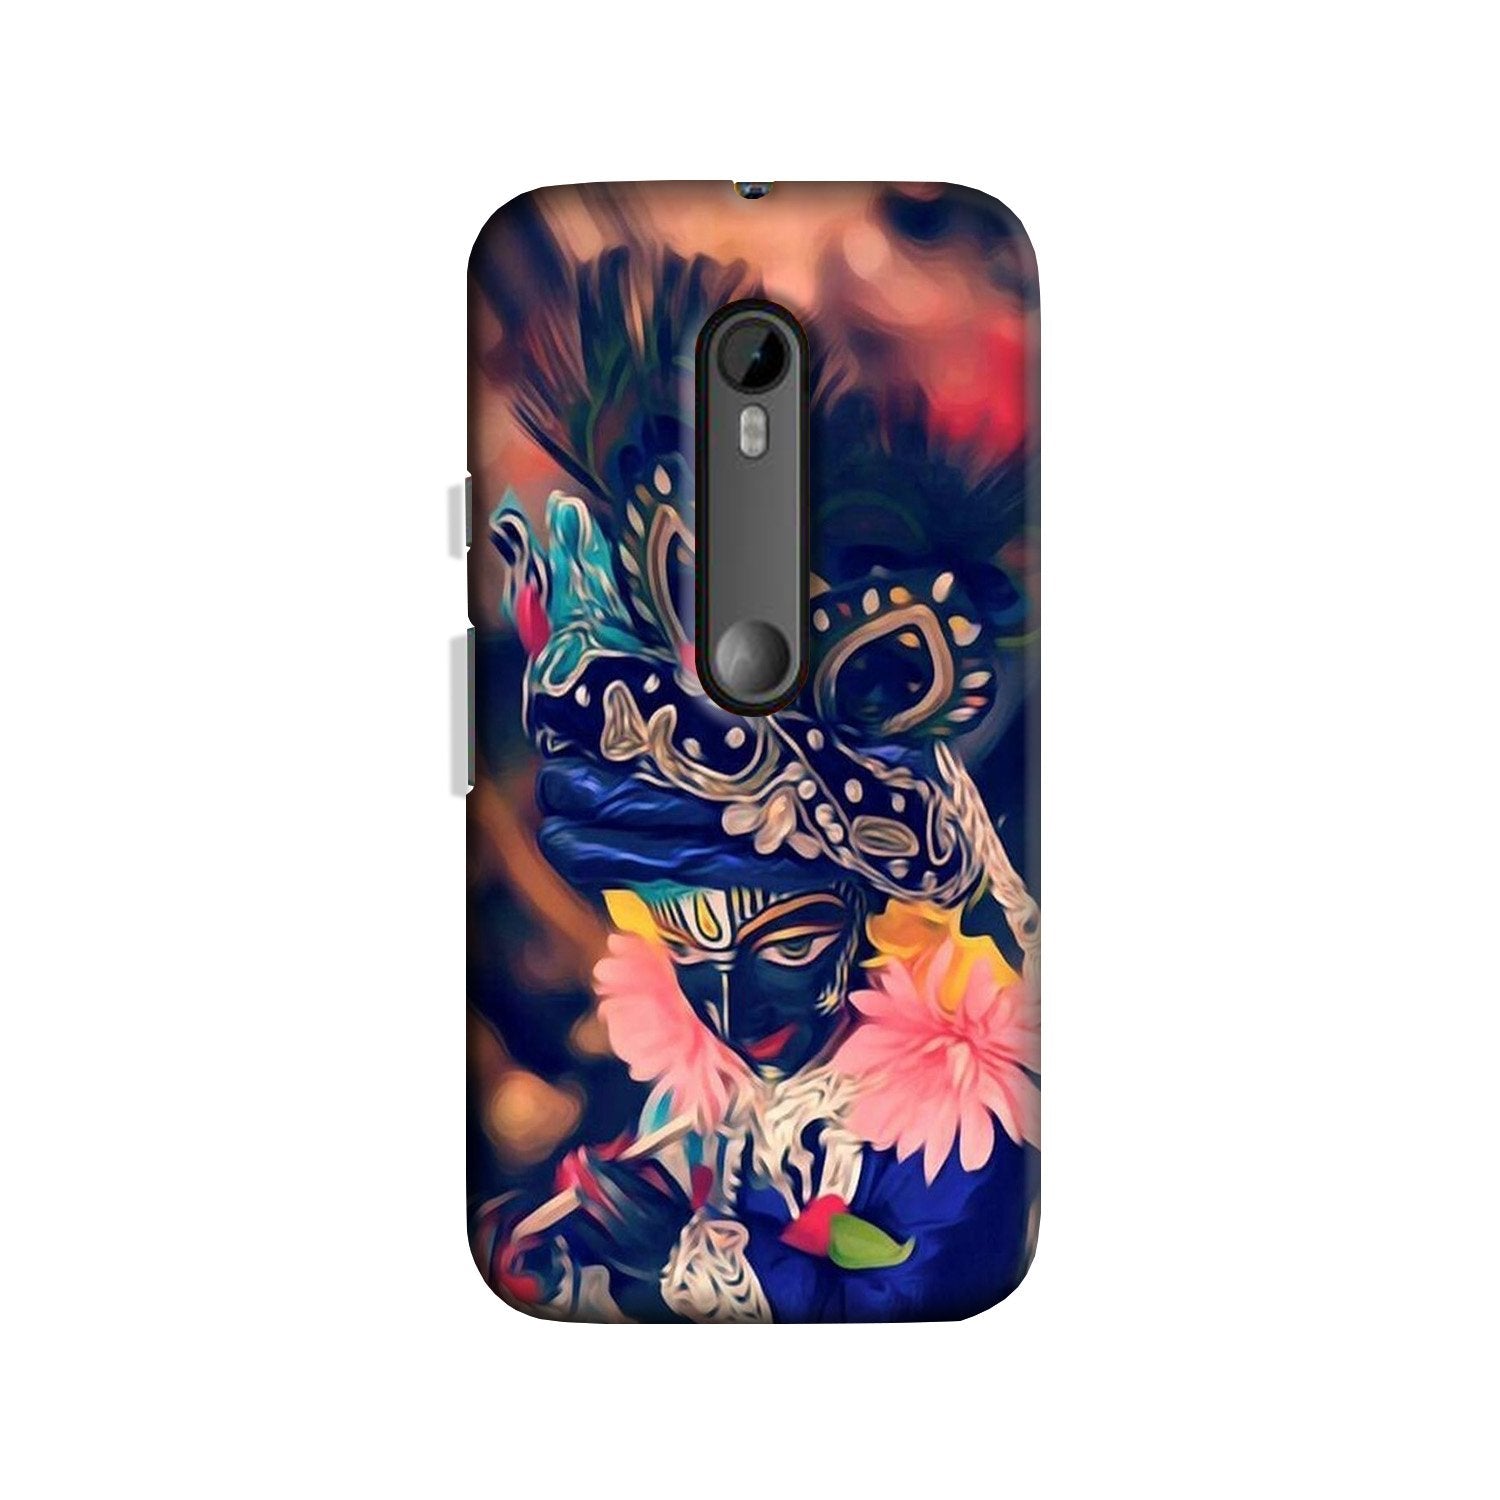 Lord Krishna Case for Moto X Play